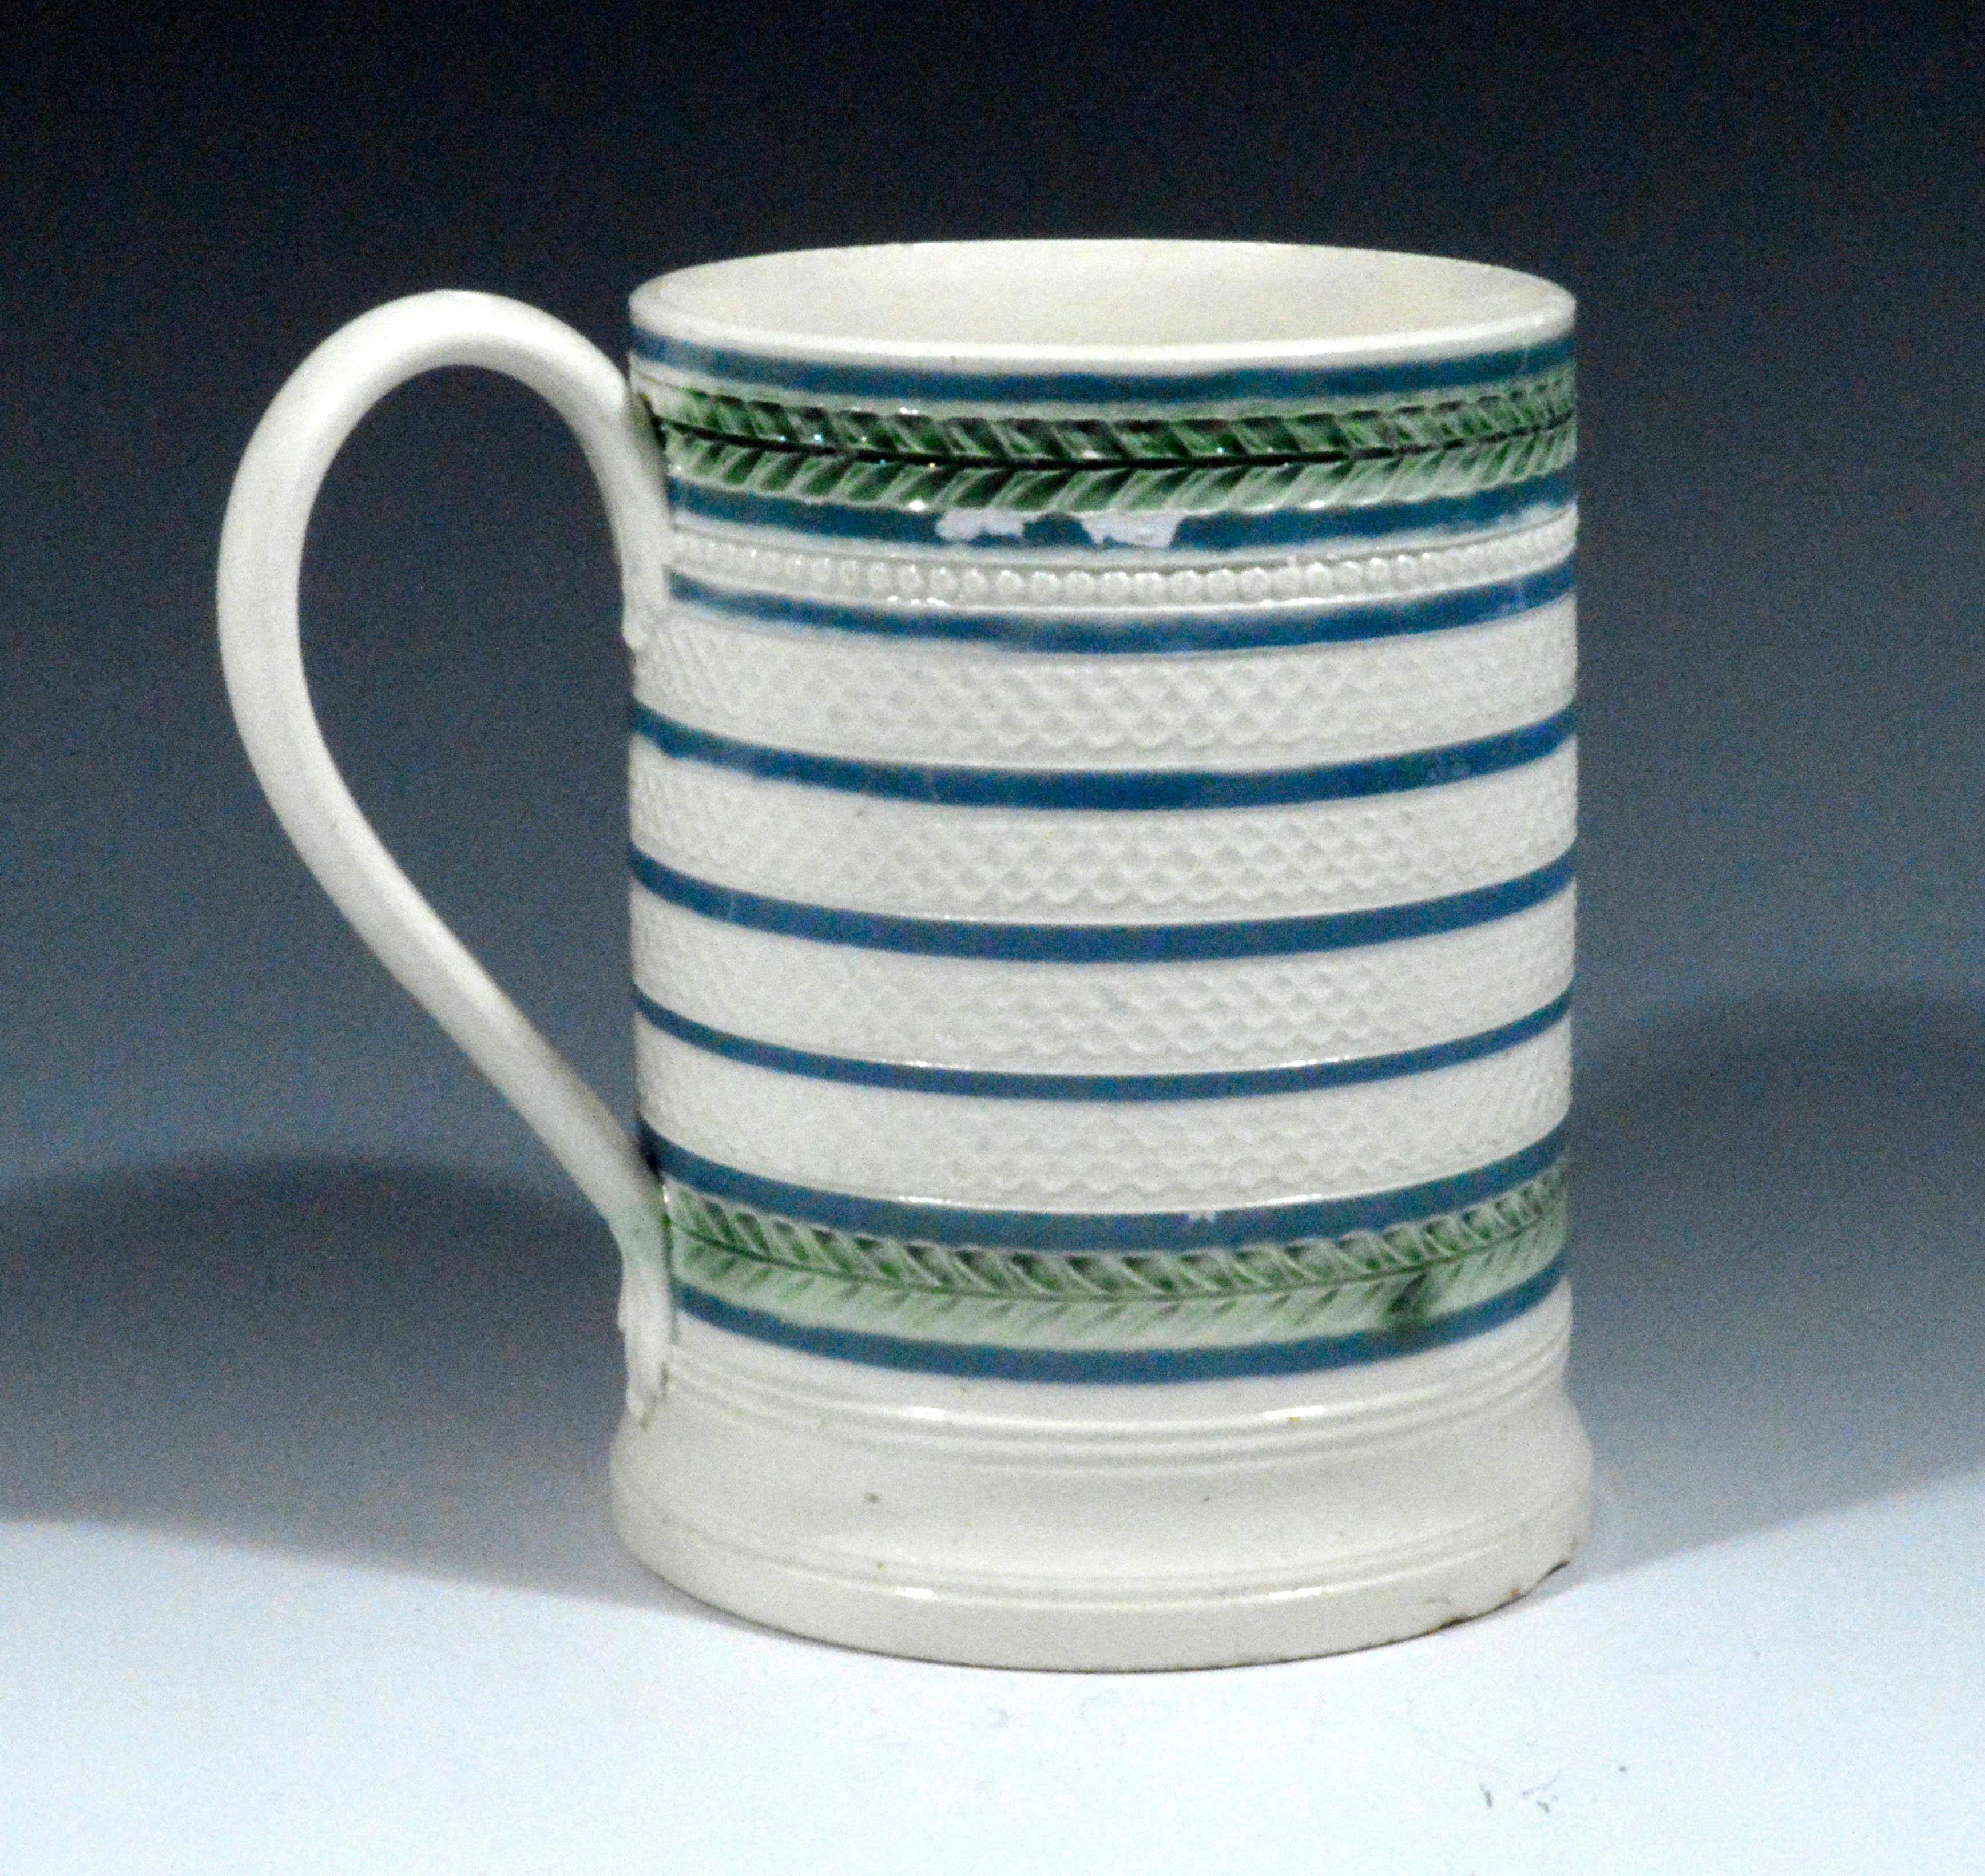 English creamware tankard, 
circa 1810-1820.

The creamware tankard is decorated with a series of moulded engine-turned honeycomb designs separated with bands of blue dip and above and below are green colored bands of continuous leaf